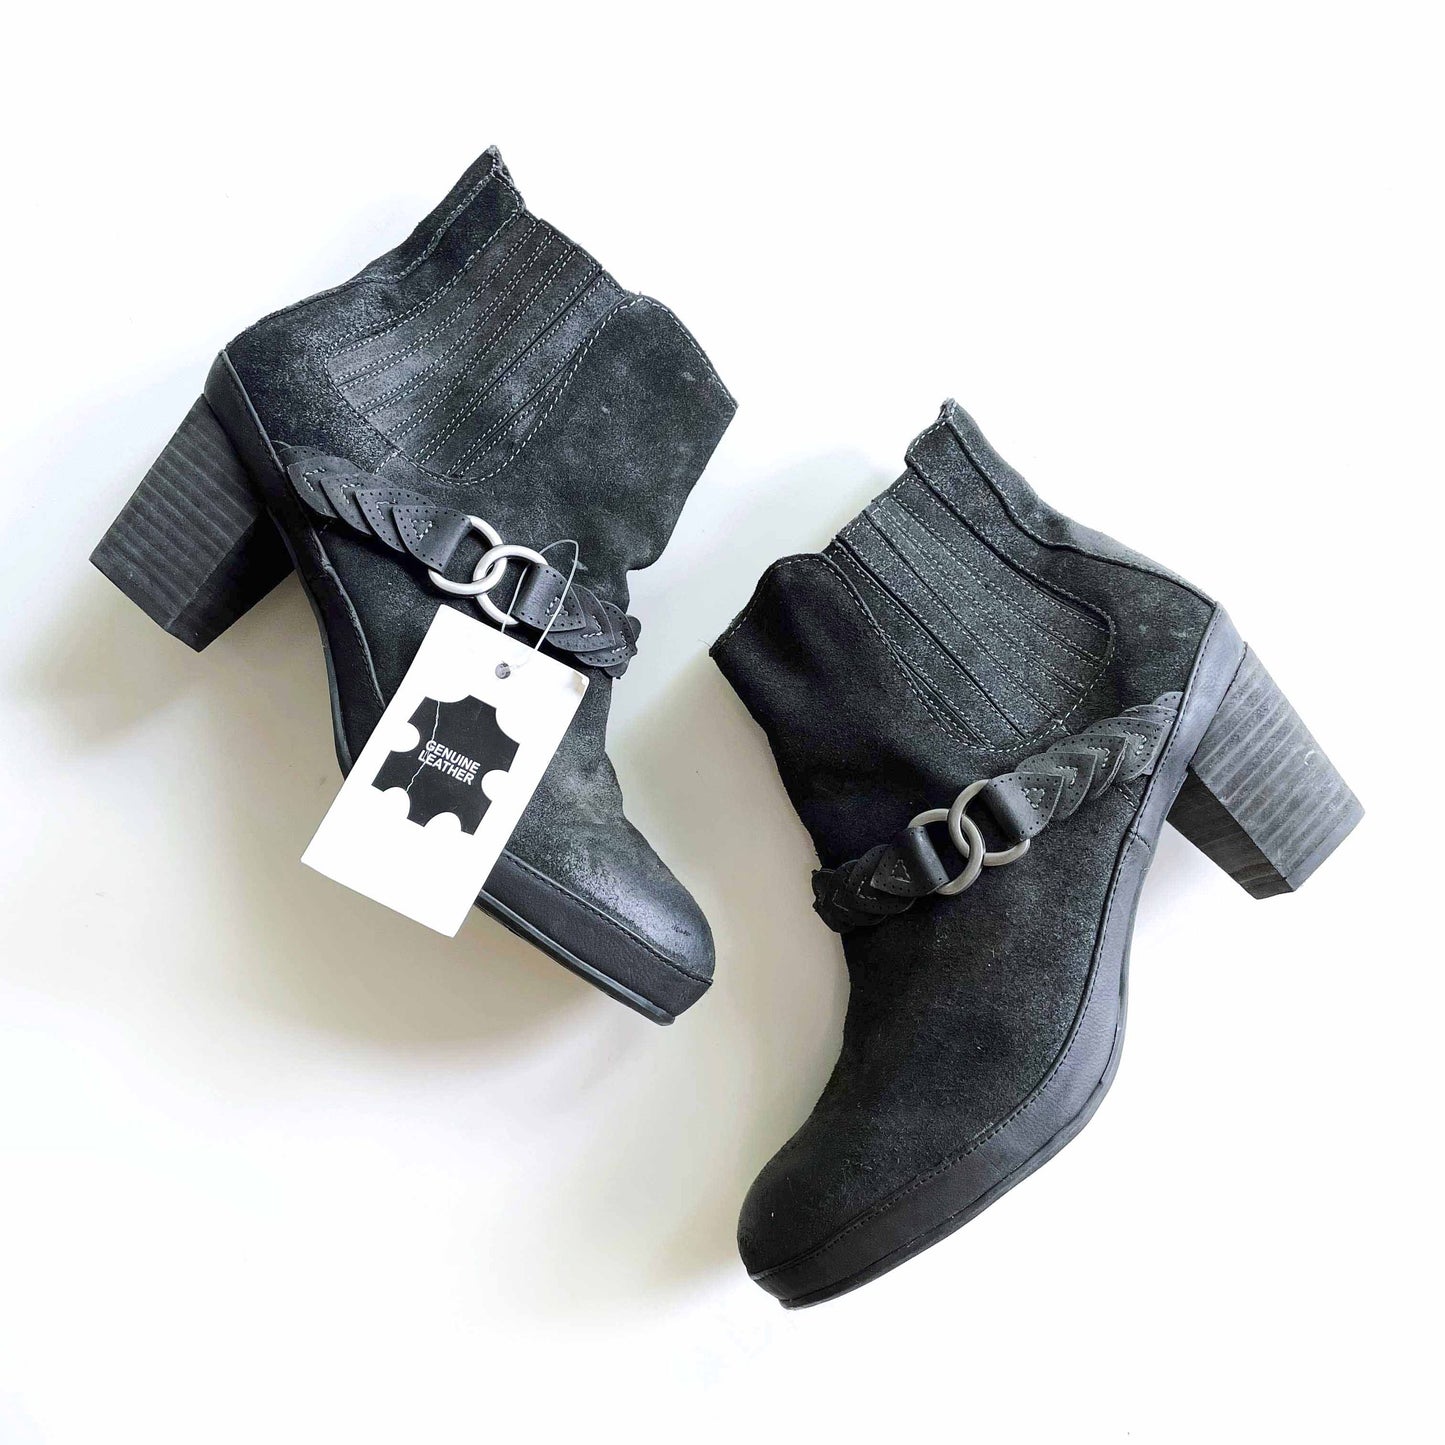 nwt sierra west suede harness ankle booties - size 9.5